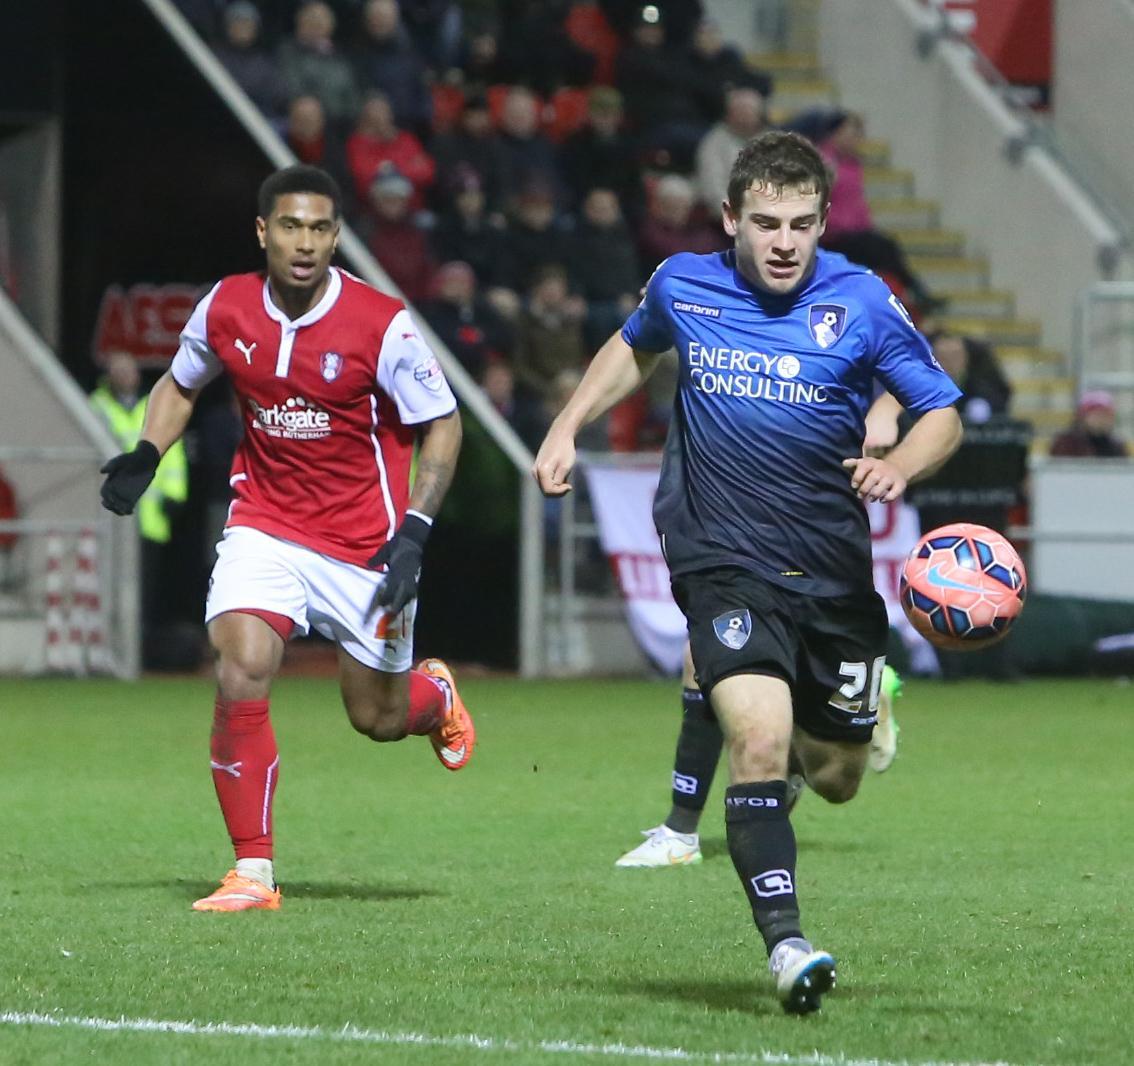 All our pictures of AFC Bournemouth at Rotherham in the FA Cup. 